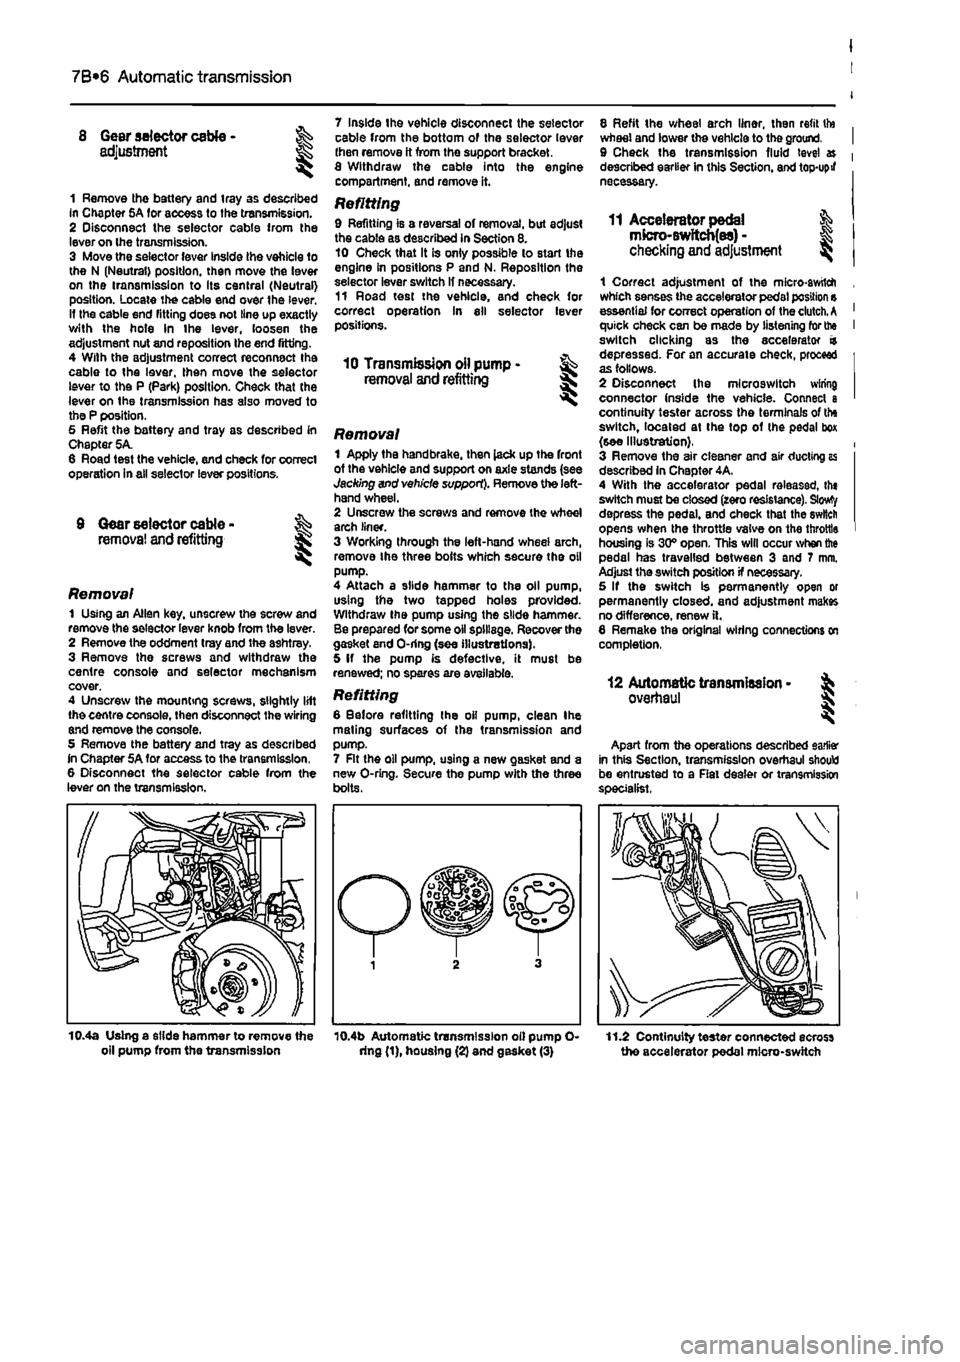 FIAT PUNTO 1996 176 / 1.G User Guide 
7B*6 Automatic transmission 
Gear selector cable -adjustment 
1 Remove the battery and tray as described In Chapter 5A for access to the transmission. 2 Disconnect the selector cable from the lever o